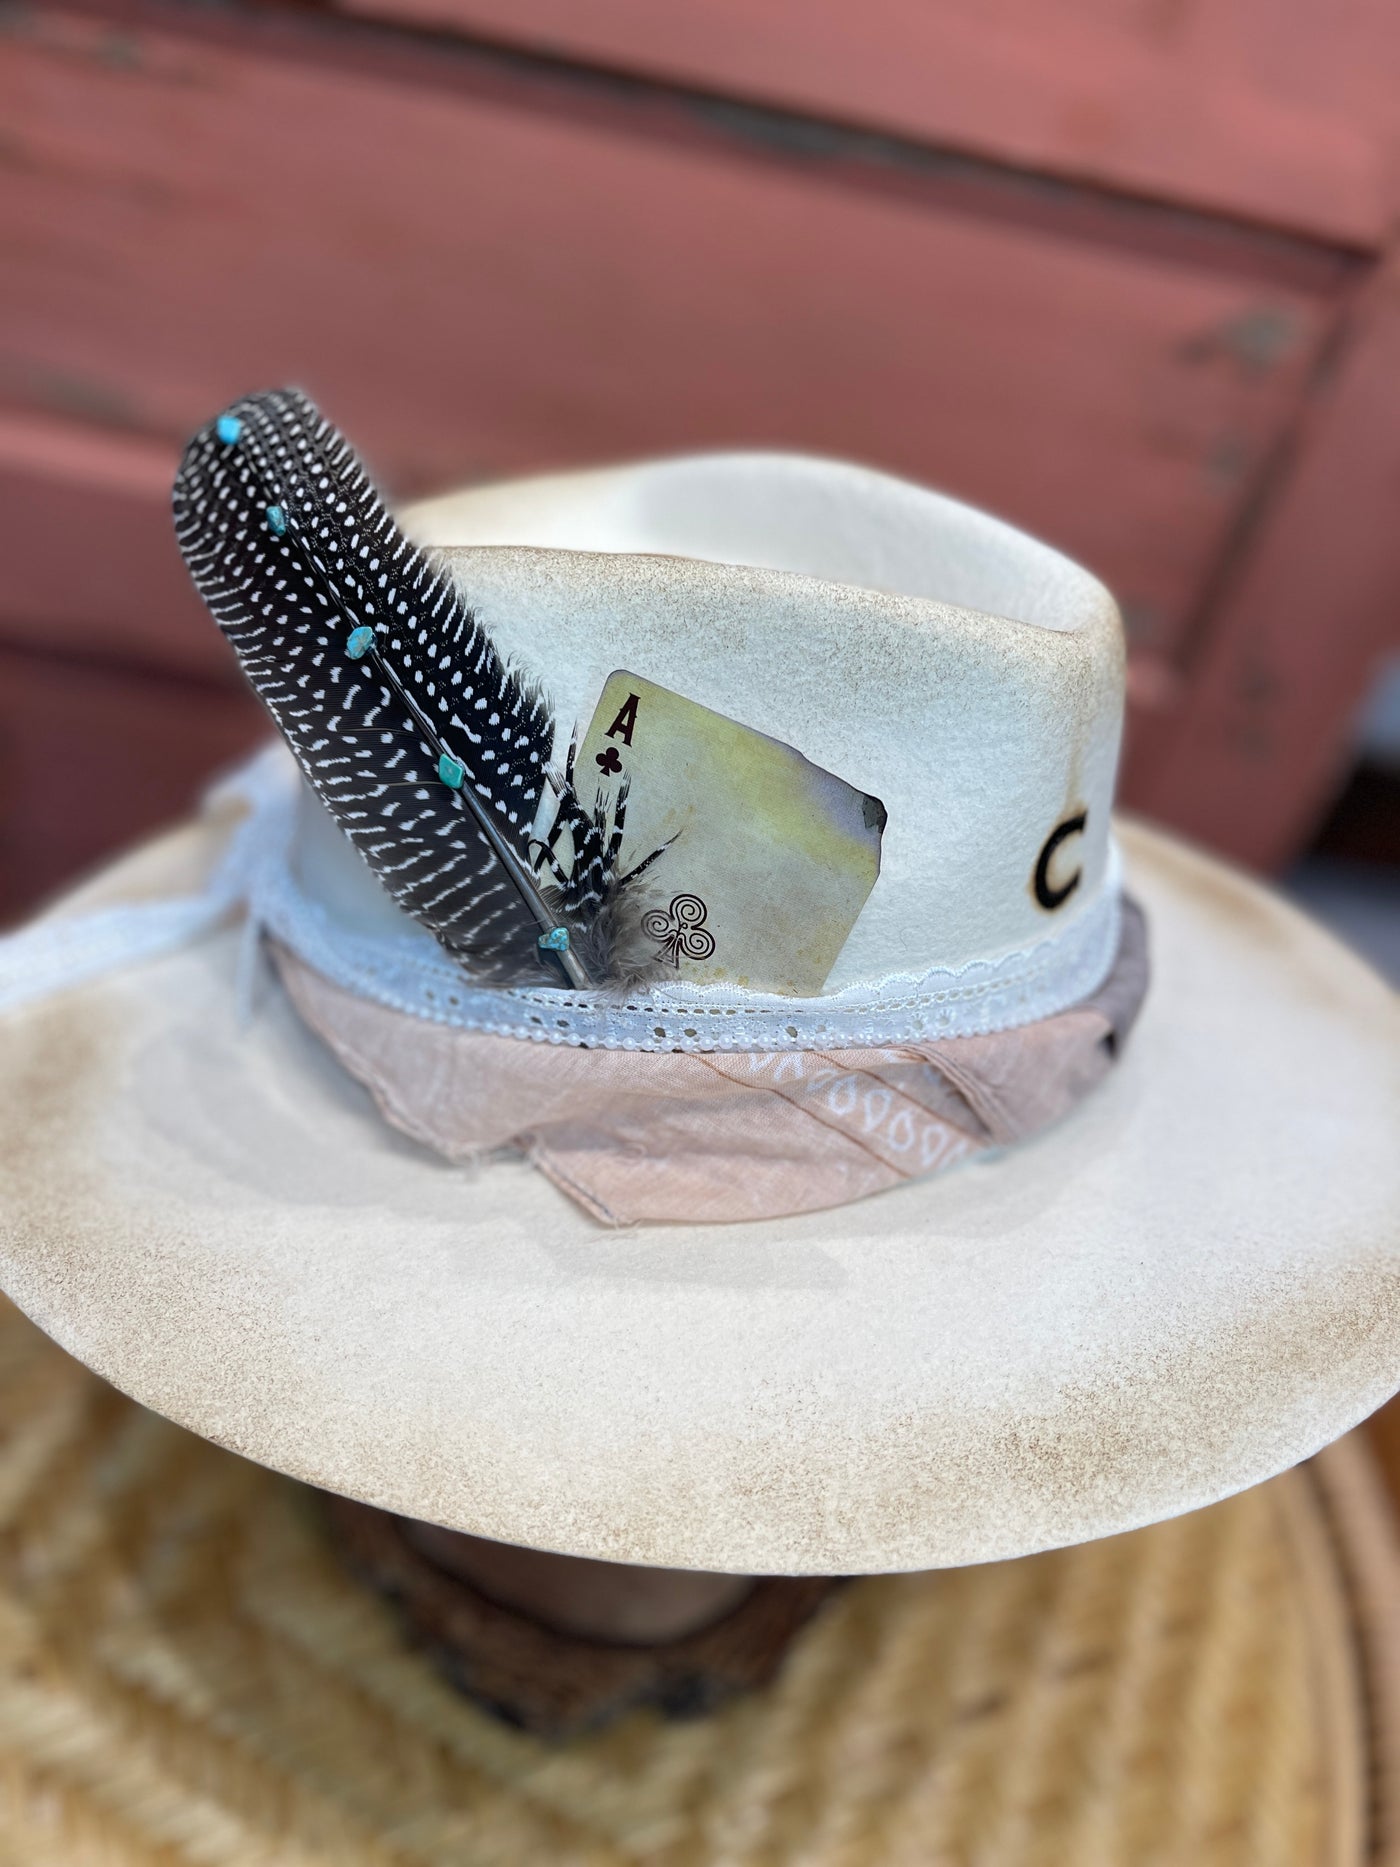 Lainey's Lucky Feather Trail Hat (Spotlight Model)